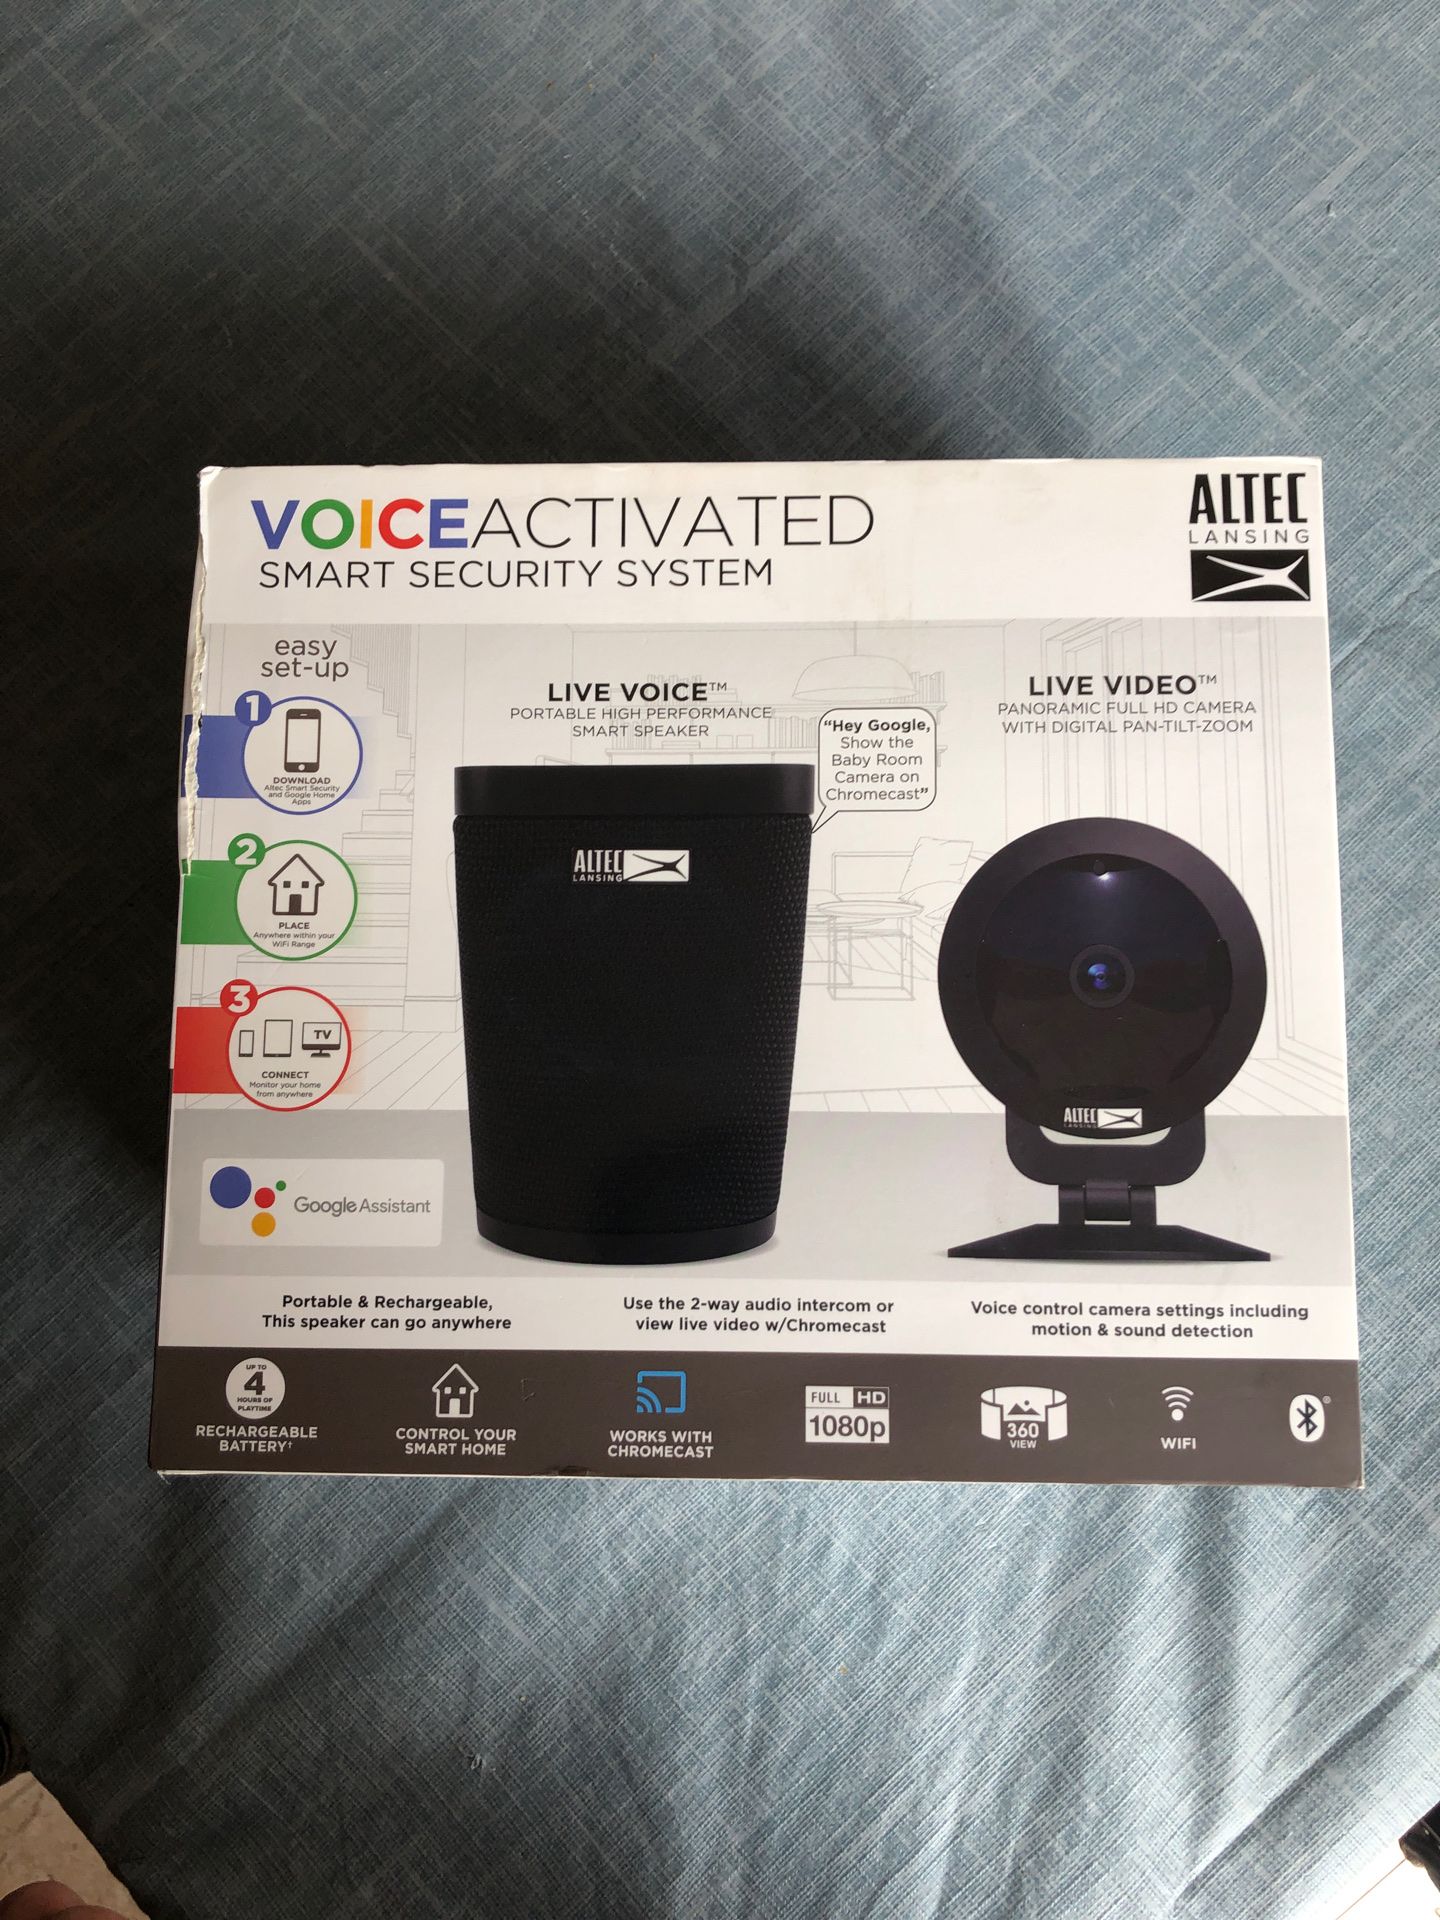 Altec Voice Activated SMART SECURITY SYSTEM